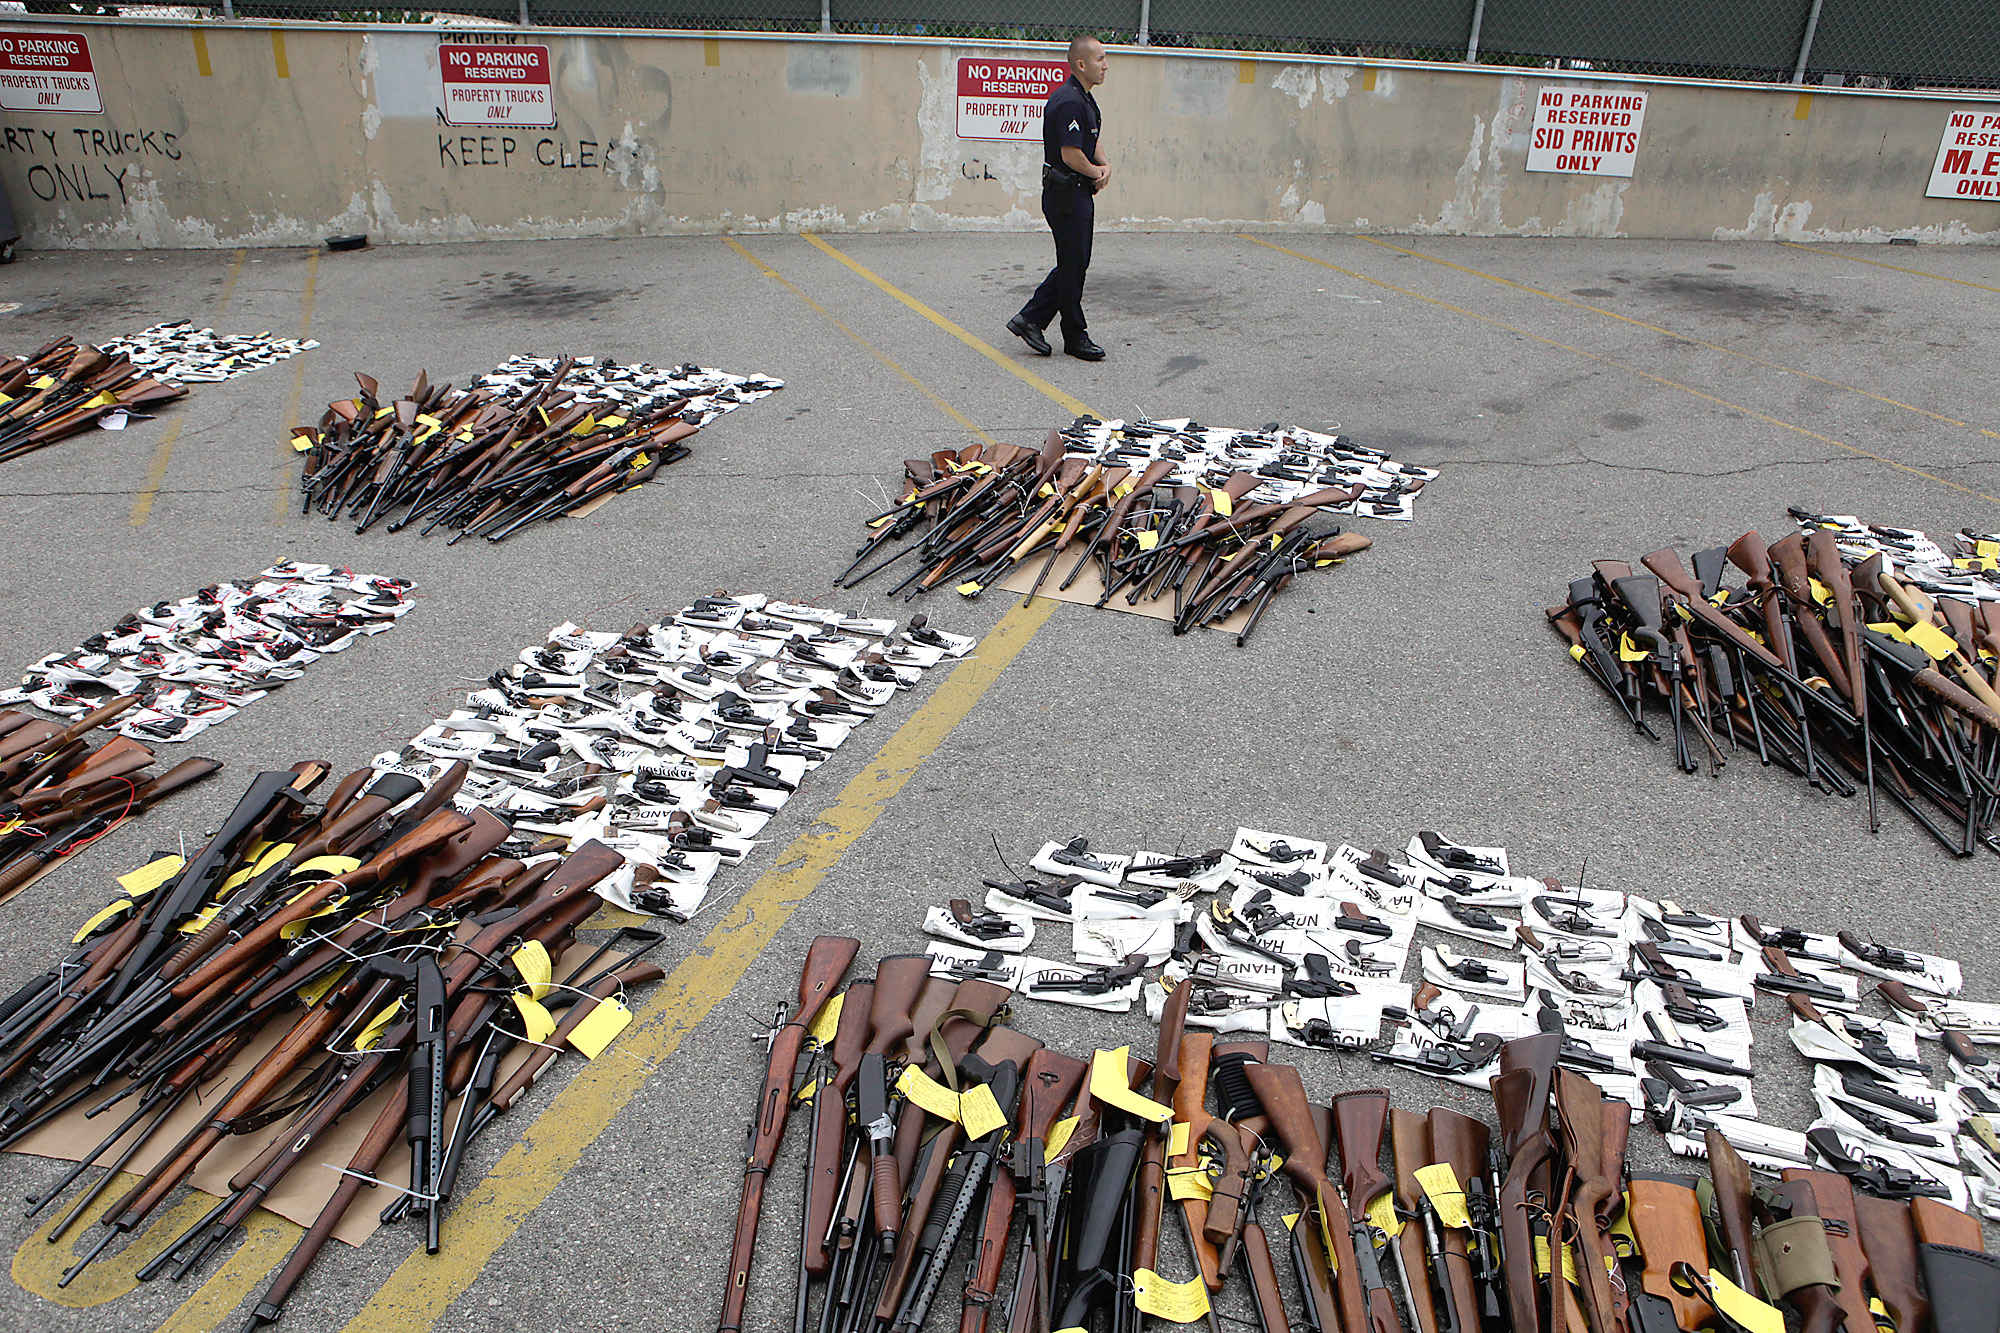 LAPD officer Manuel Ramirez stands guard near some of the nearly 1,700 weapons turned over the weekend at a news conference on May 11, 2009. (Brian Vander Brug—Los Angeles Times/Getty Images)